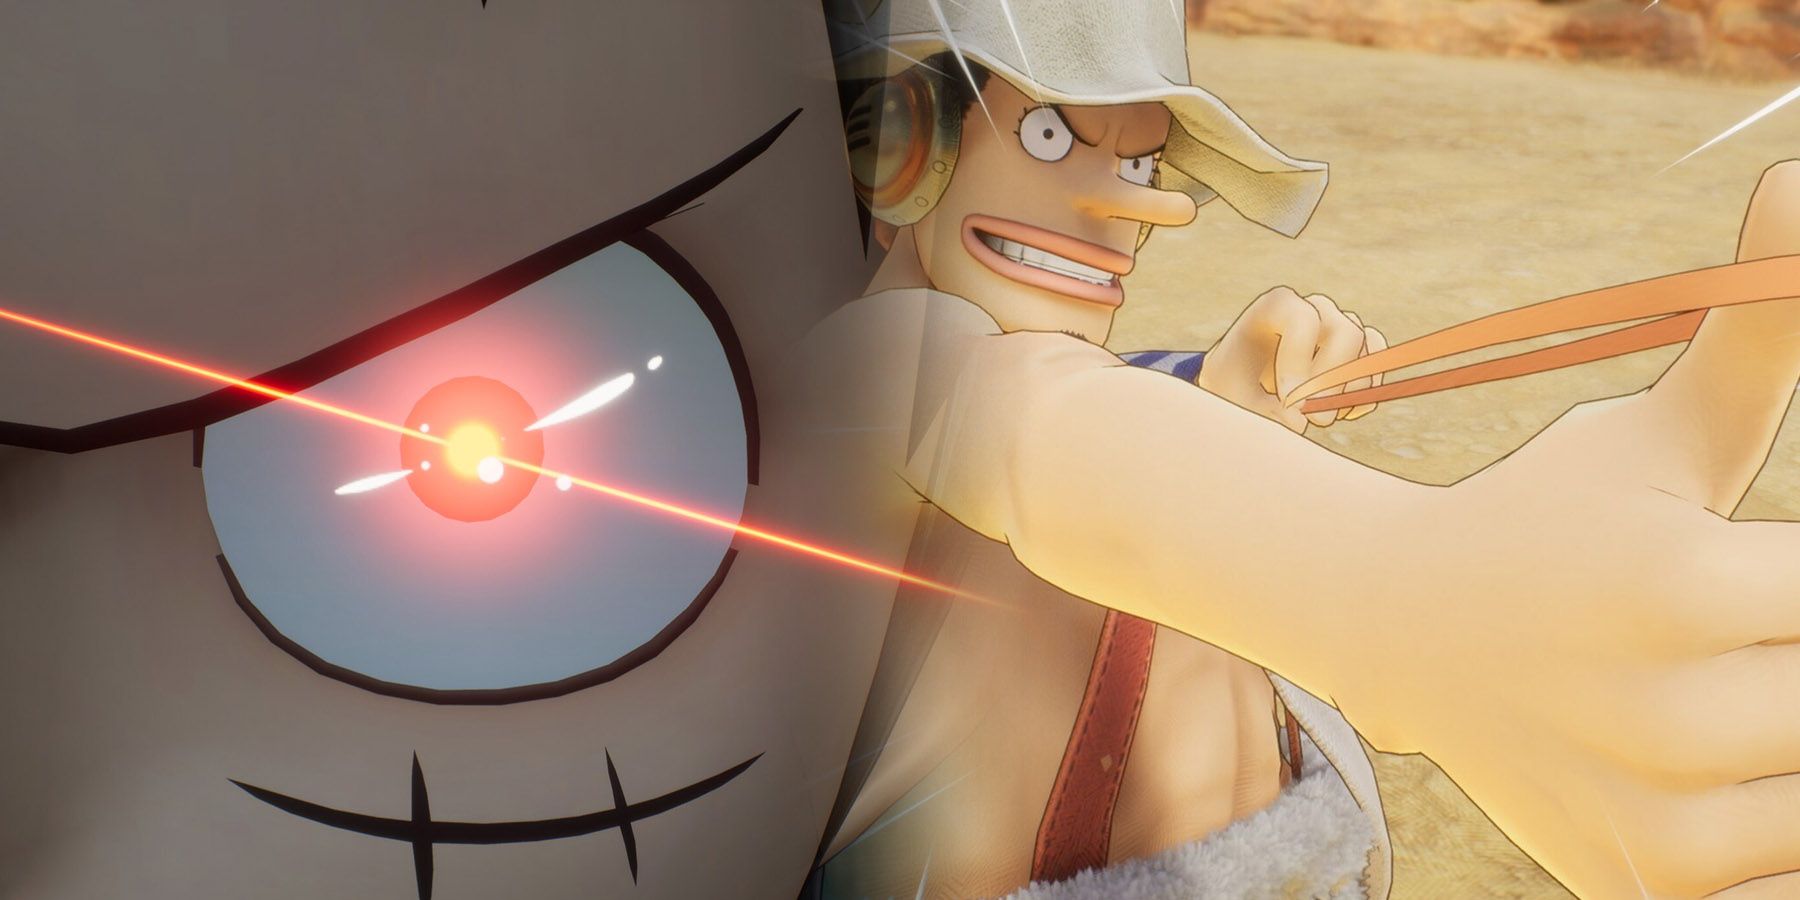 One Piece Odyssey - Best Skills Head Image Showing Luffy Using Conqueror's Haki And Usopp Using Rubber Band Of Doom